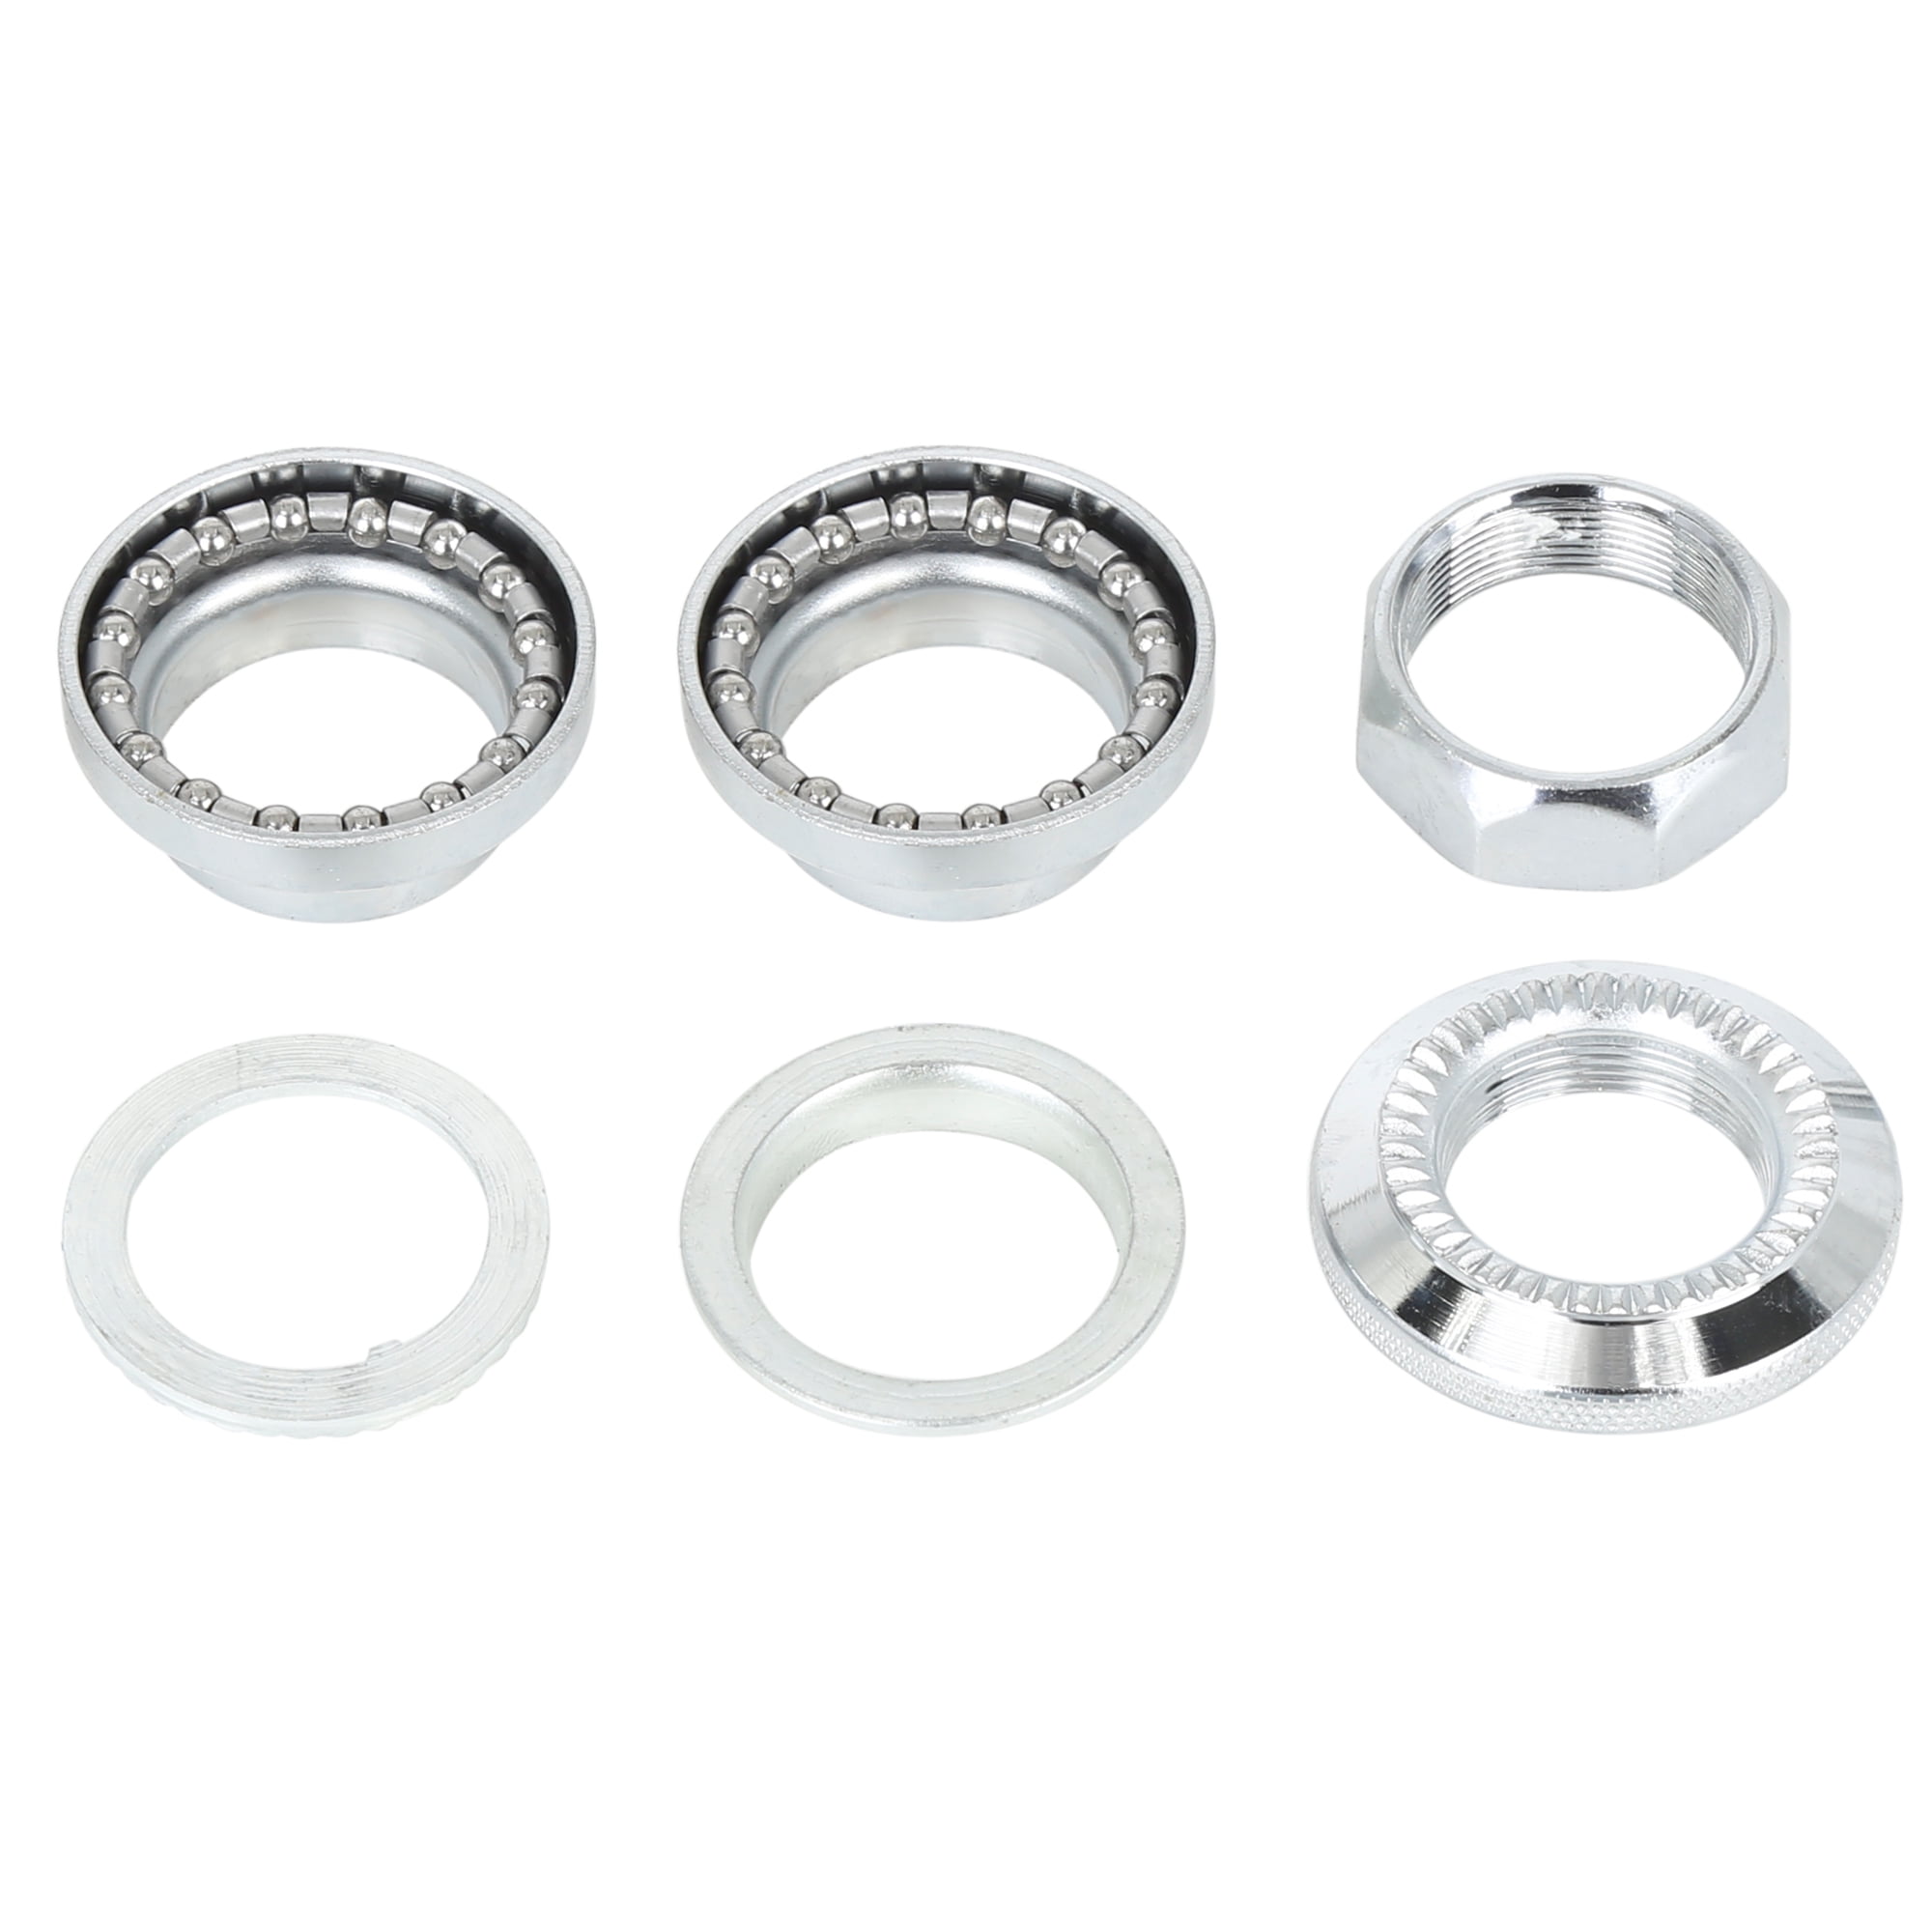 Chrome Threaded Headset 1 in 25.4 mm for Old School BMX Bike Bearings Cups Cones 